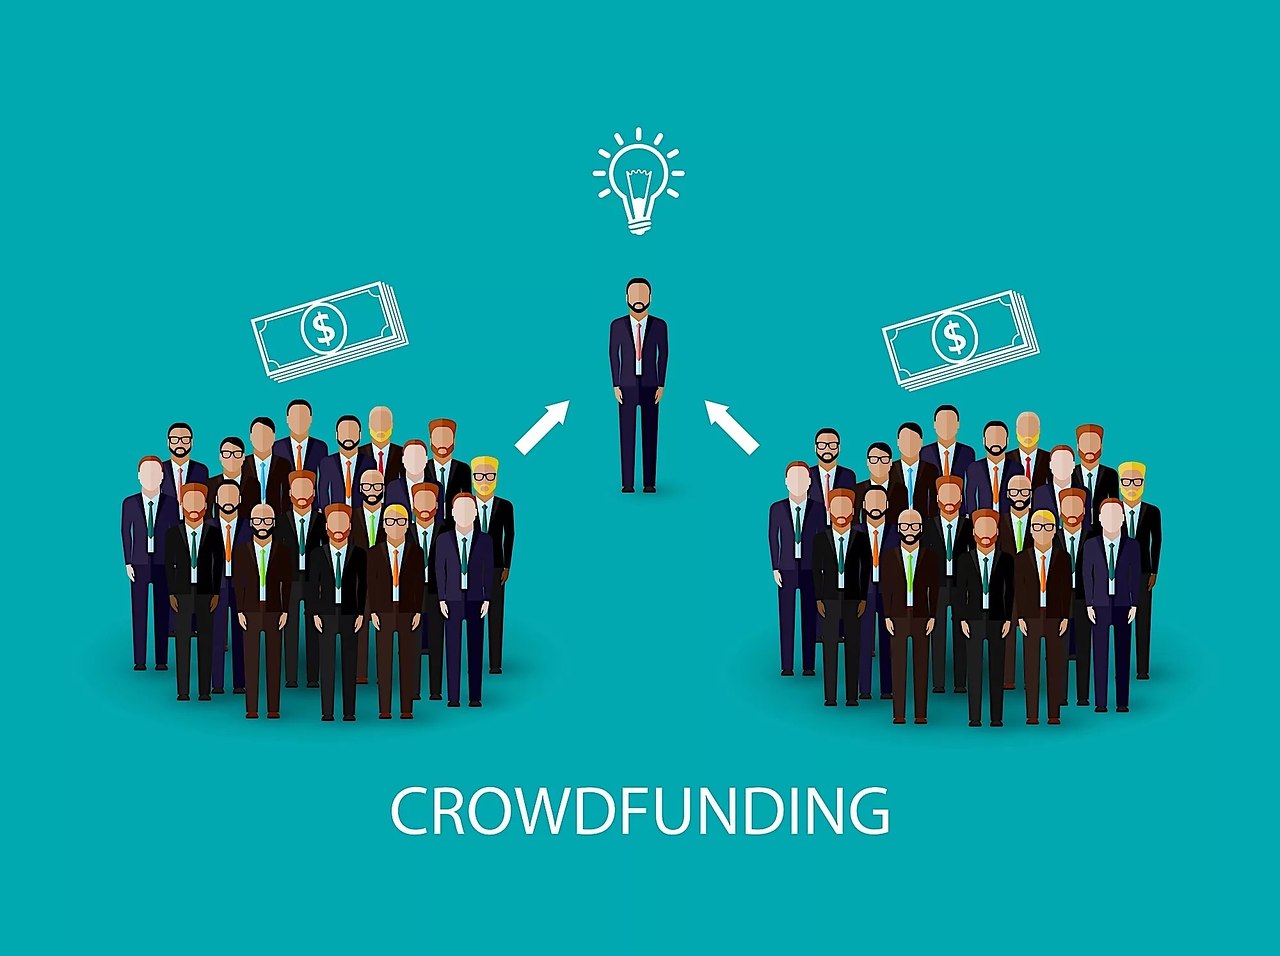 Crowdfunding projects should explore smart contract development challenges and opportunities